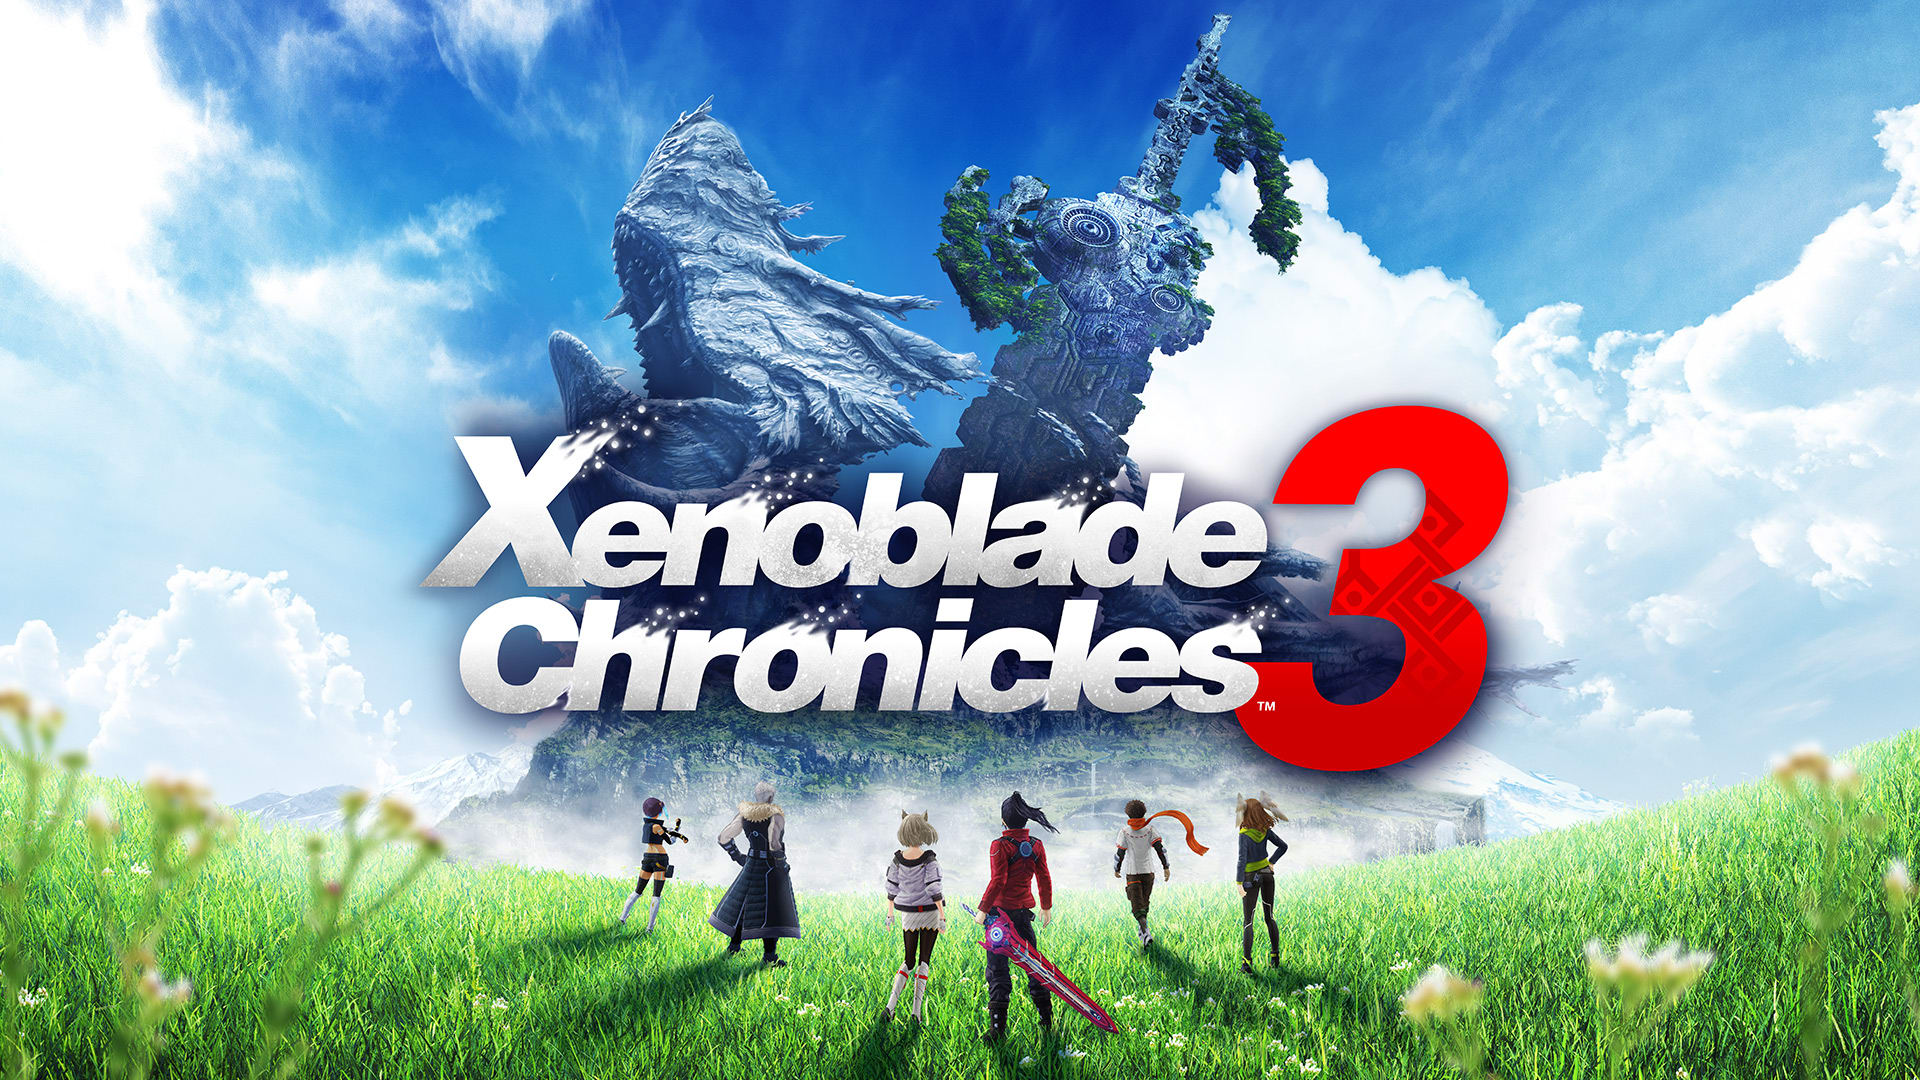 Nintendo unveils Xenoblade Chronicles 3 Direct presentation packed with new footage and details - image 1